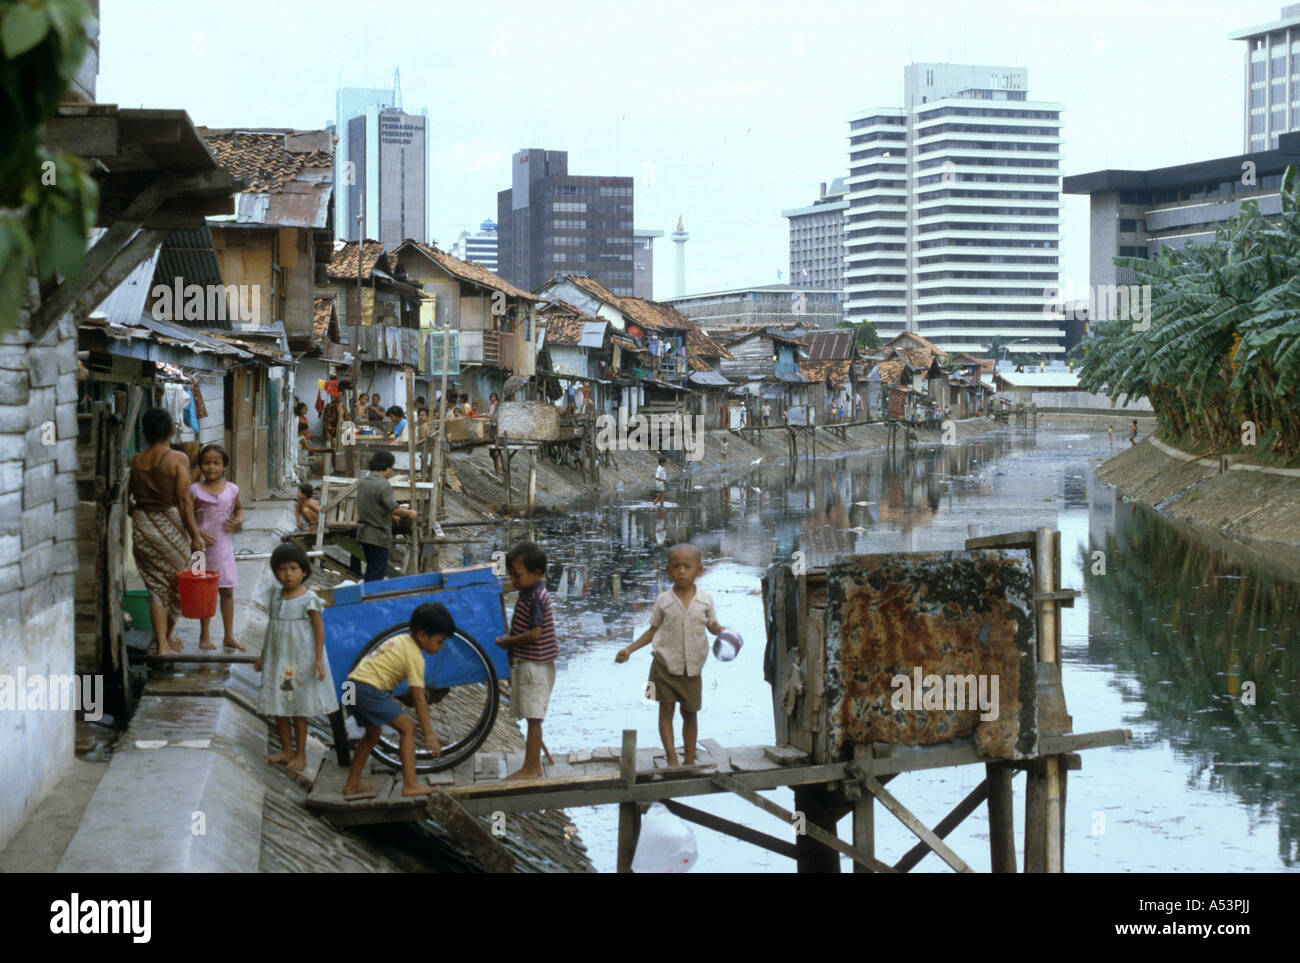 Painet ha1708 3440 indonesia slums downtown area jakarta country developing nation economically developed culture emerging Stock Photo